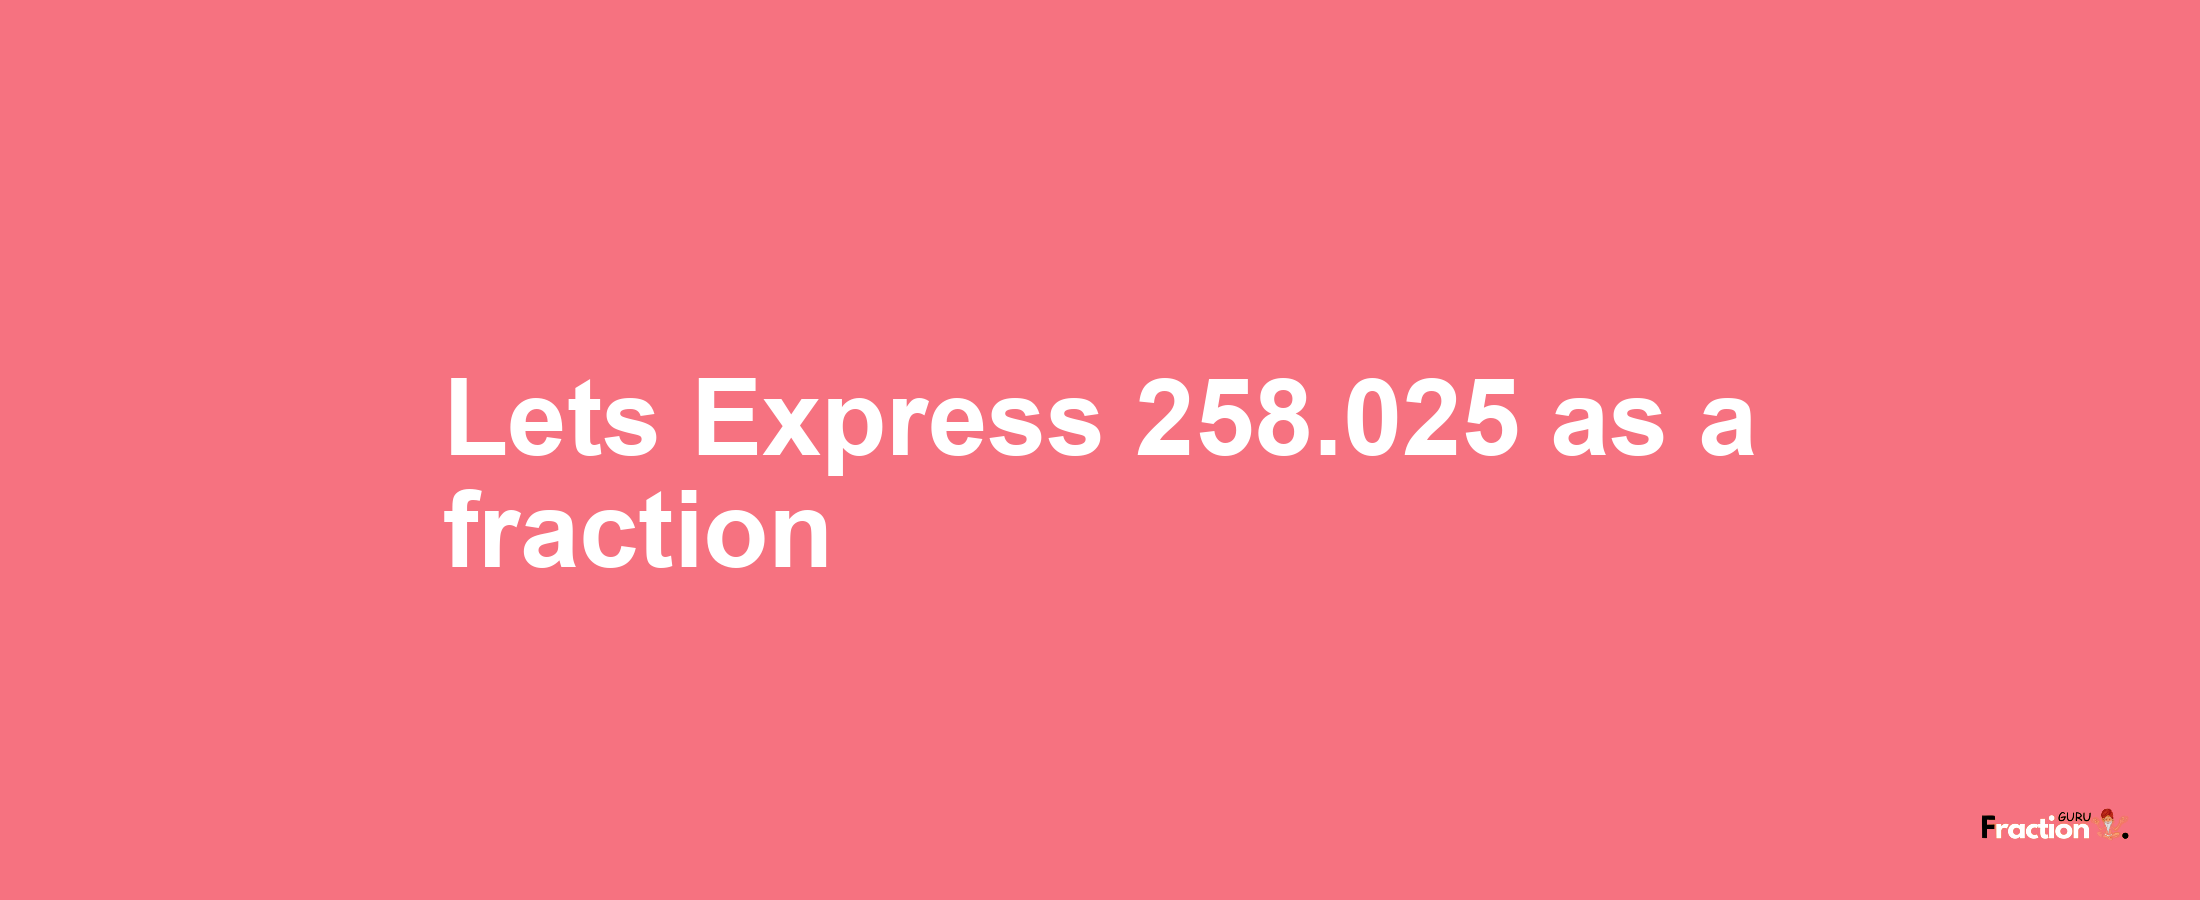 Lets Express 258.025 as afraction